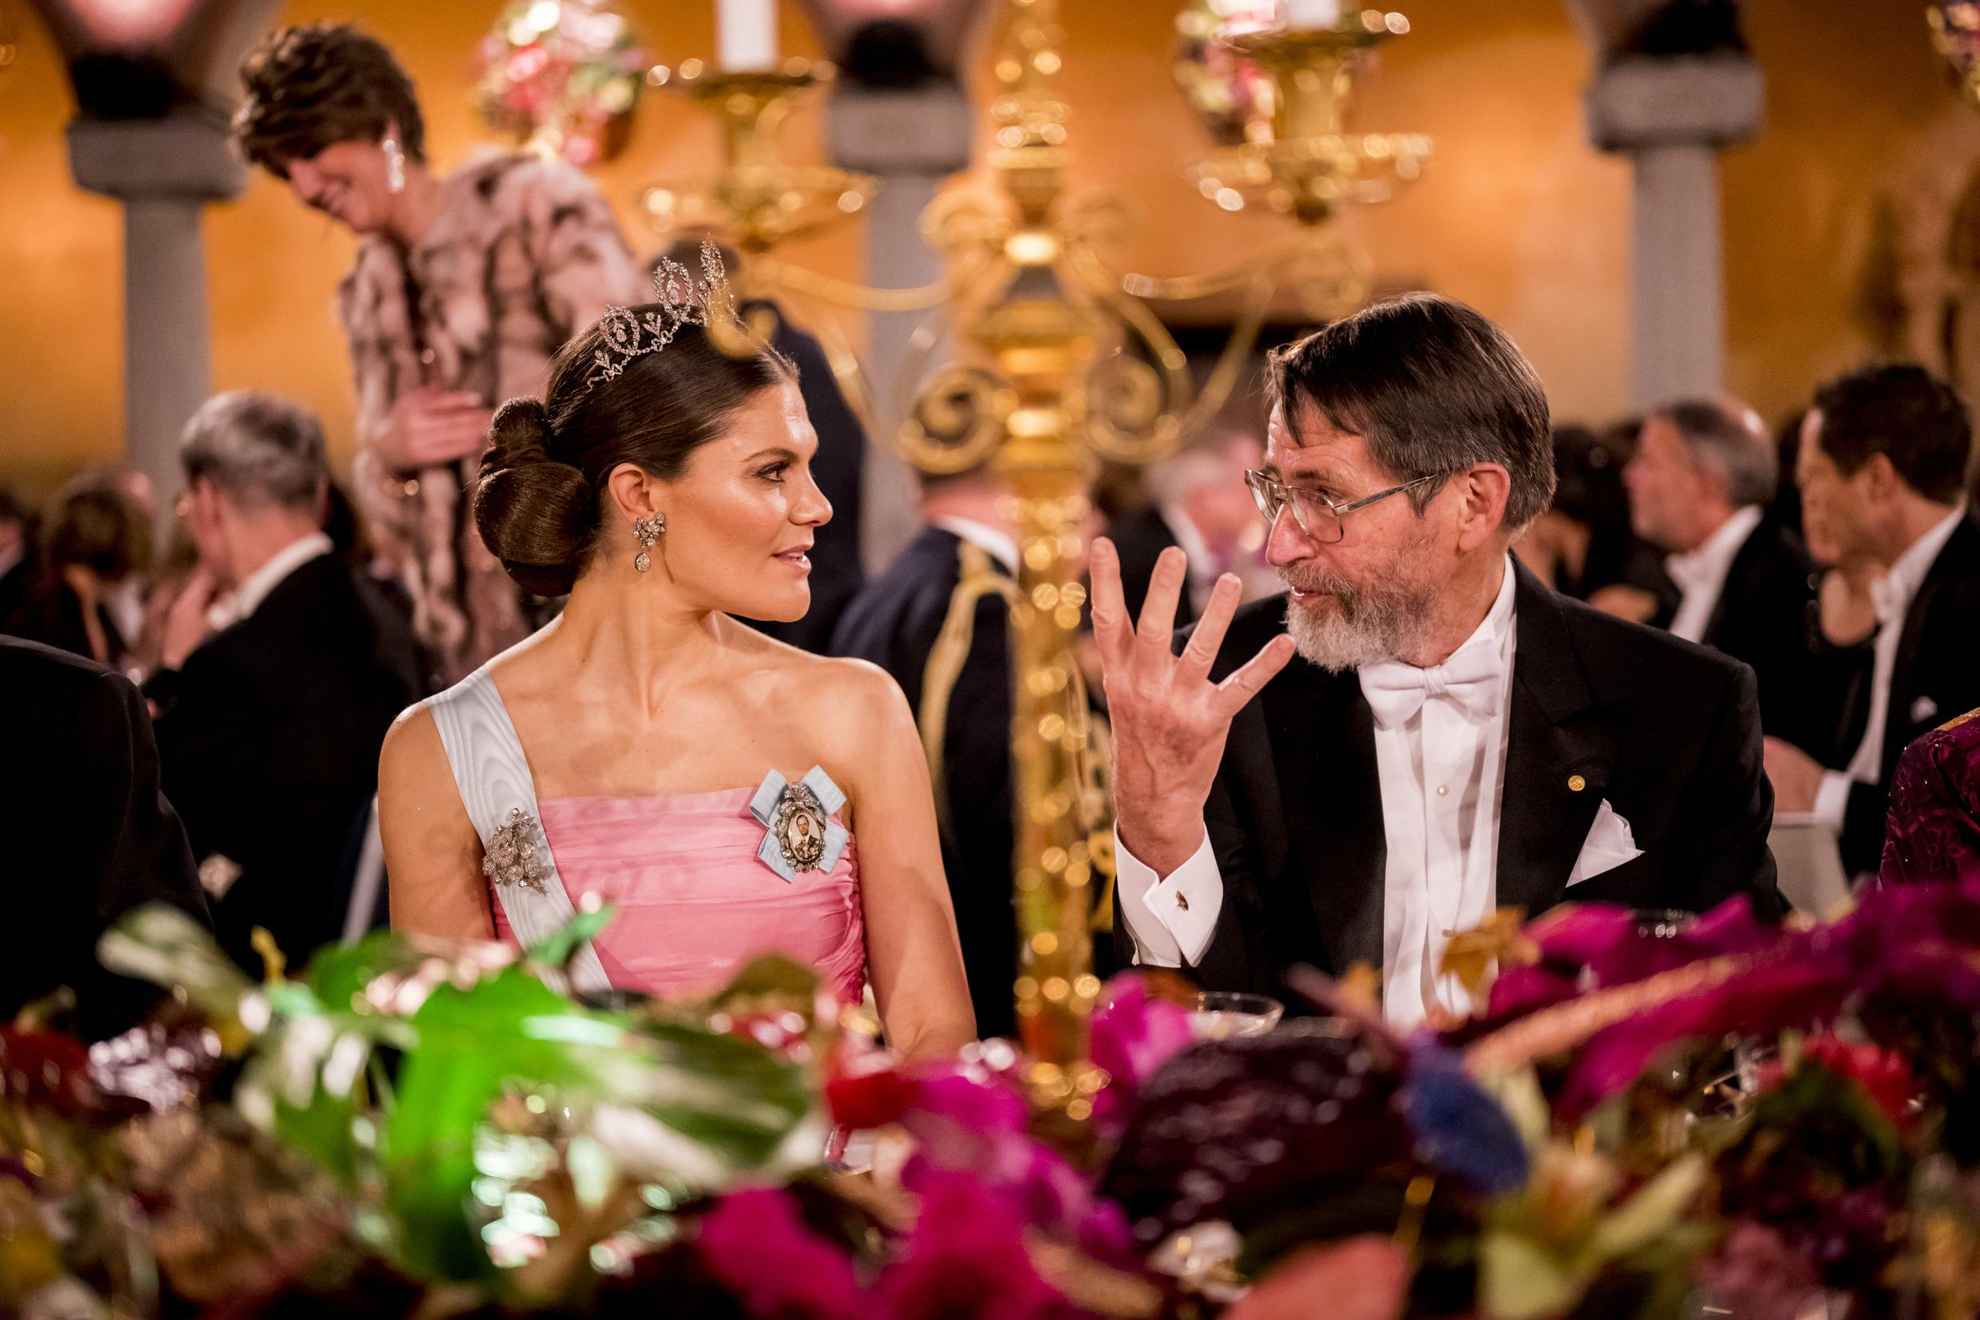 Crown Princess Victoria has a conversation with the man sitting next to her during the Nobel banquet.